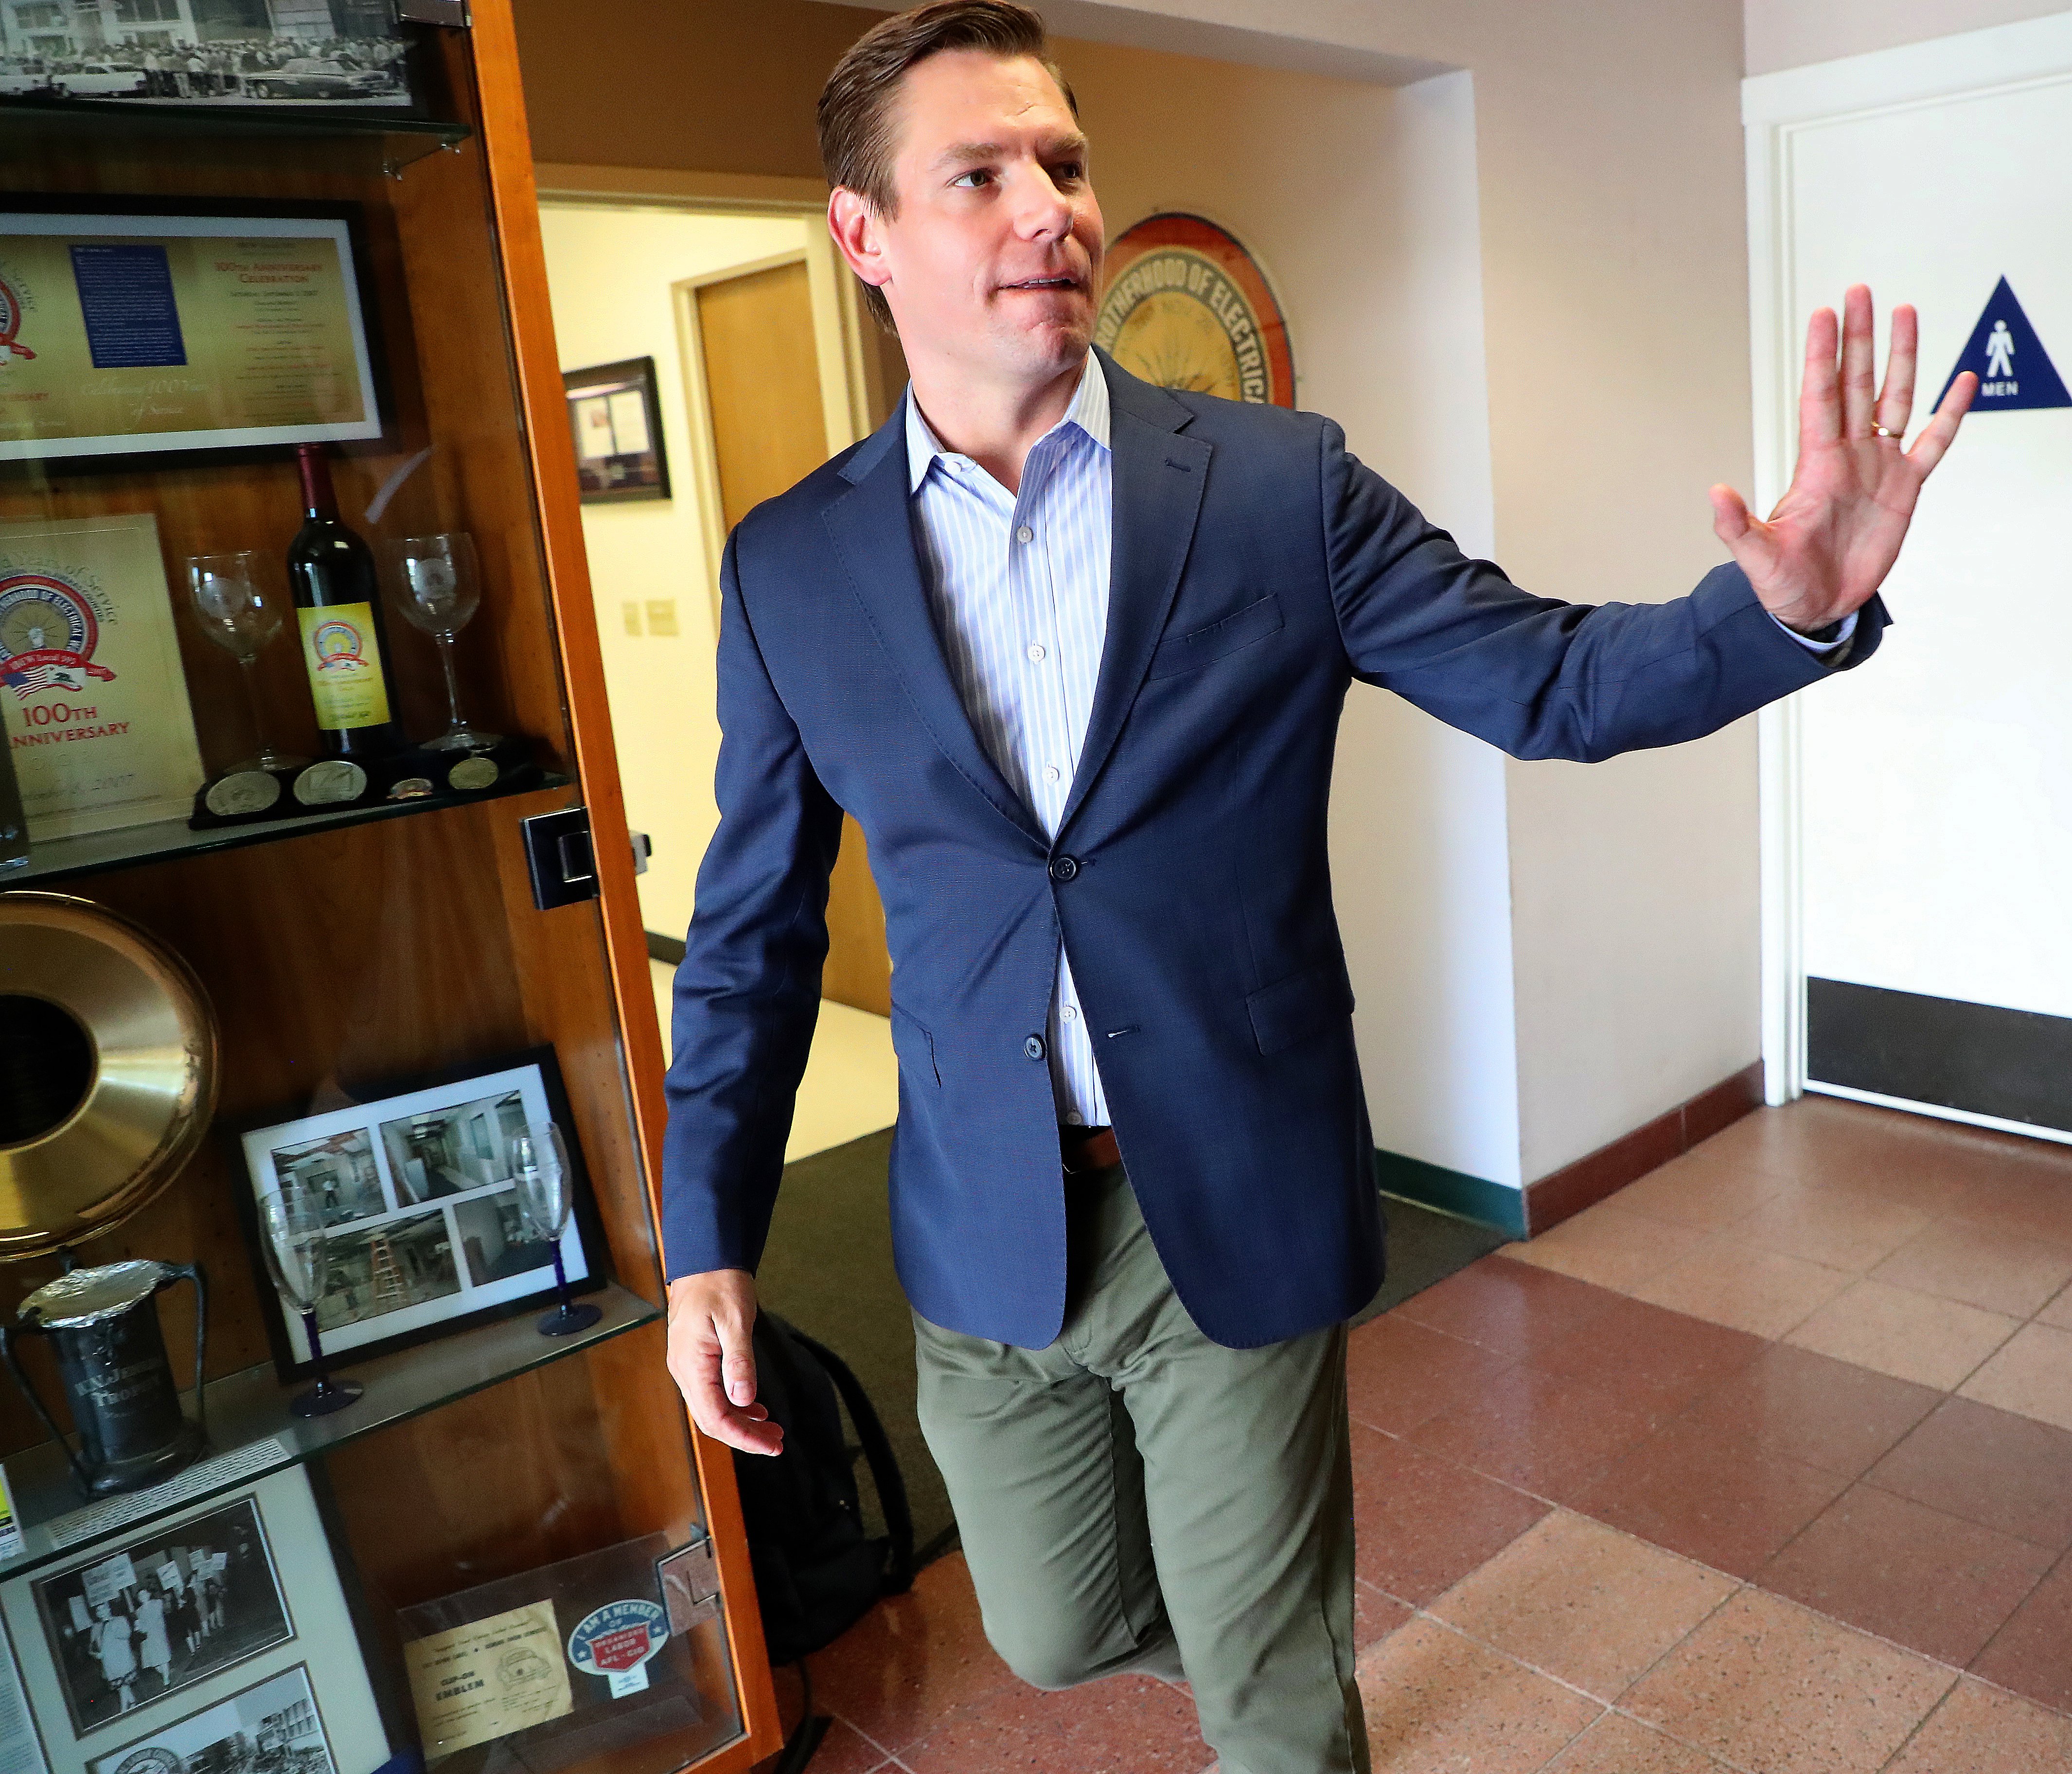 Eric Swalwell drops out of presidential race